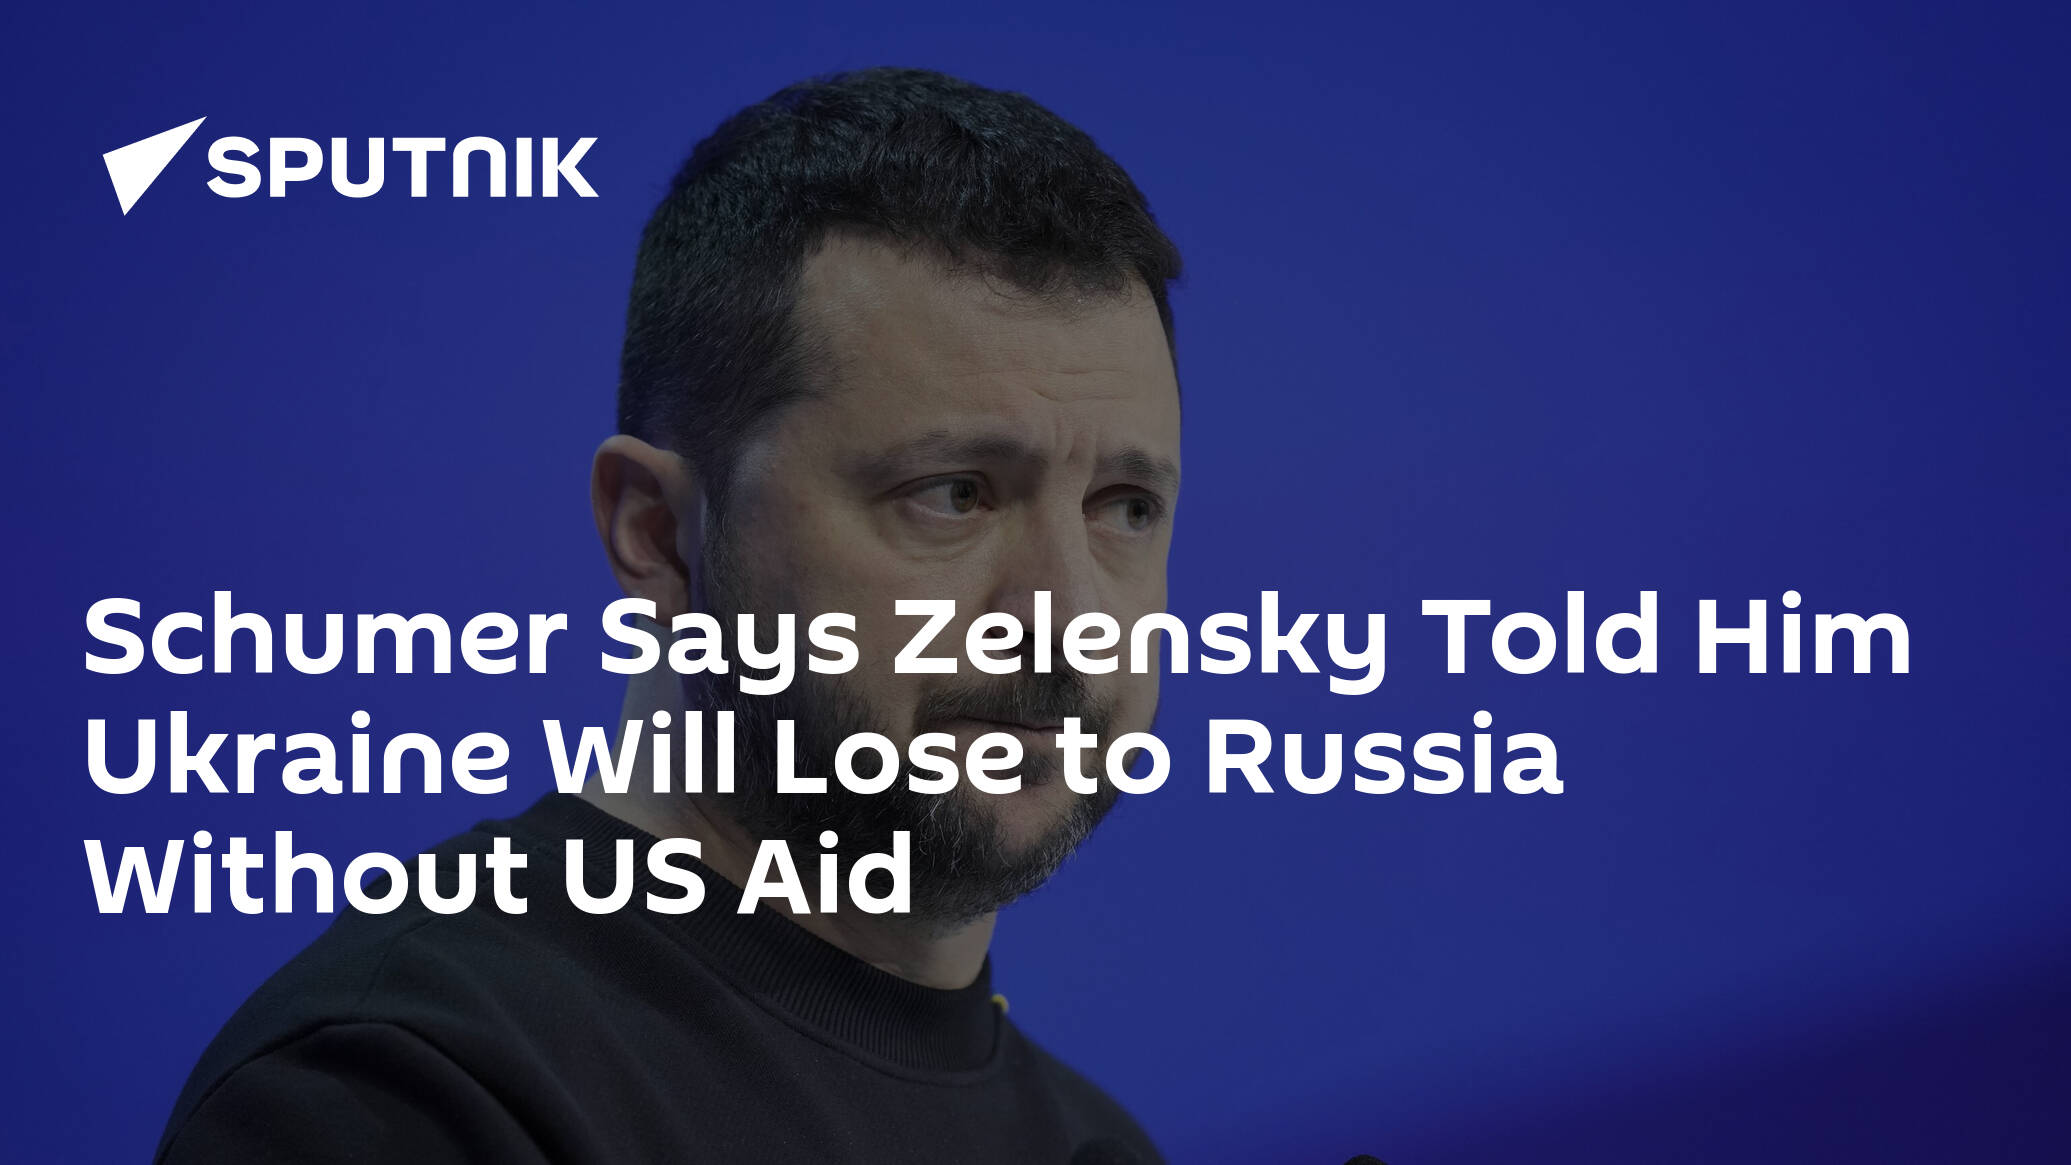 Schumer Says Zelensky Told Him Ukraine Will Lose to Russia Without US Aid